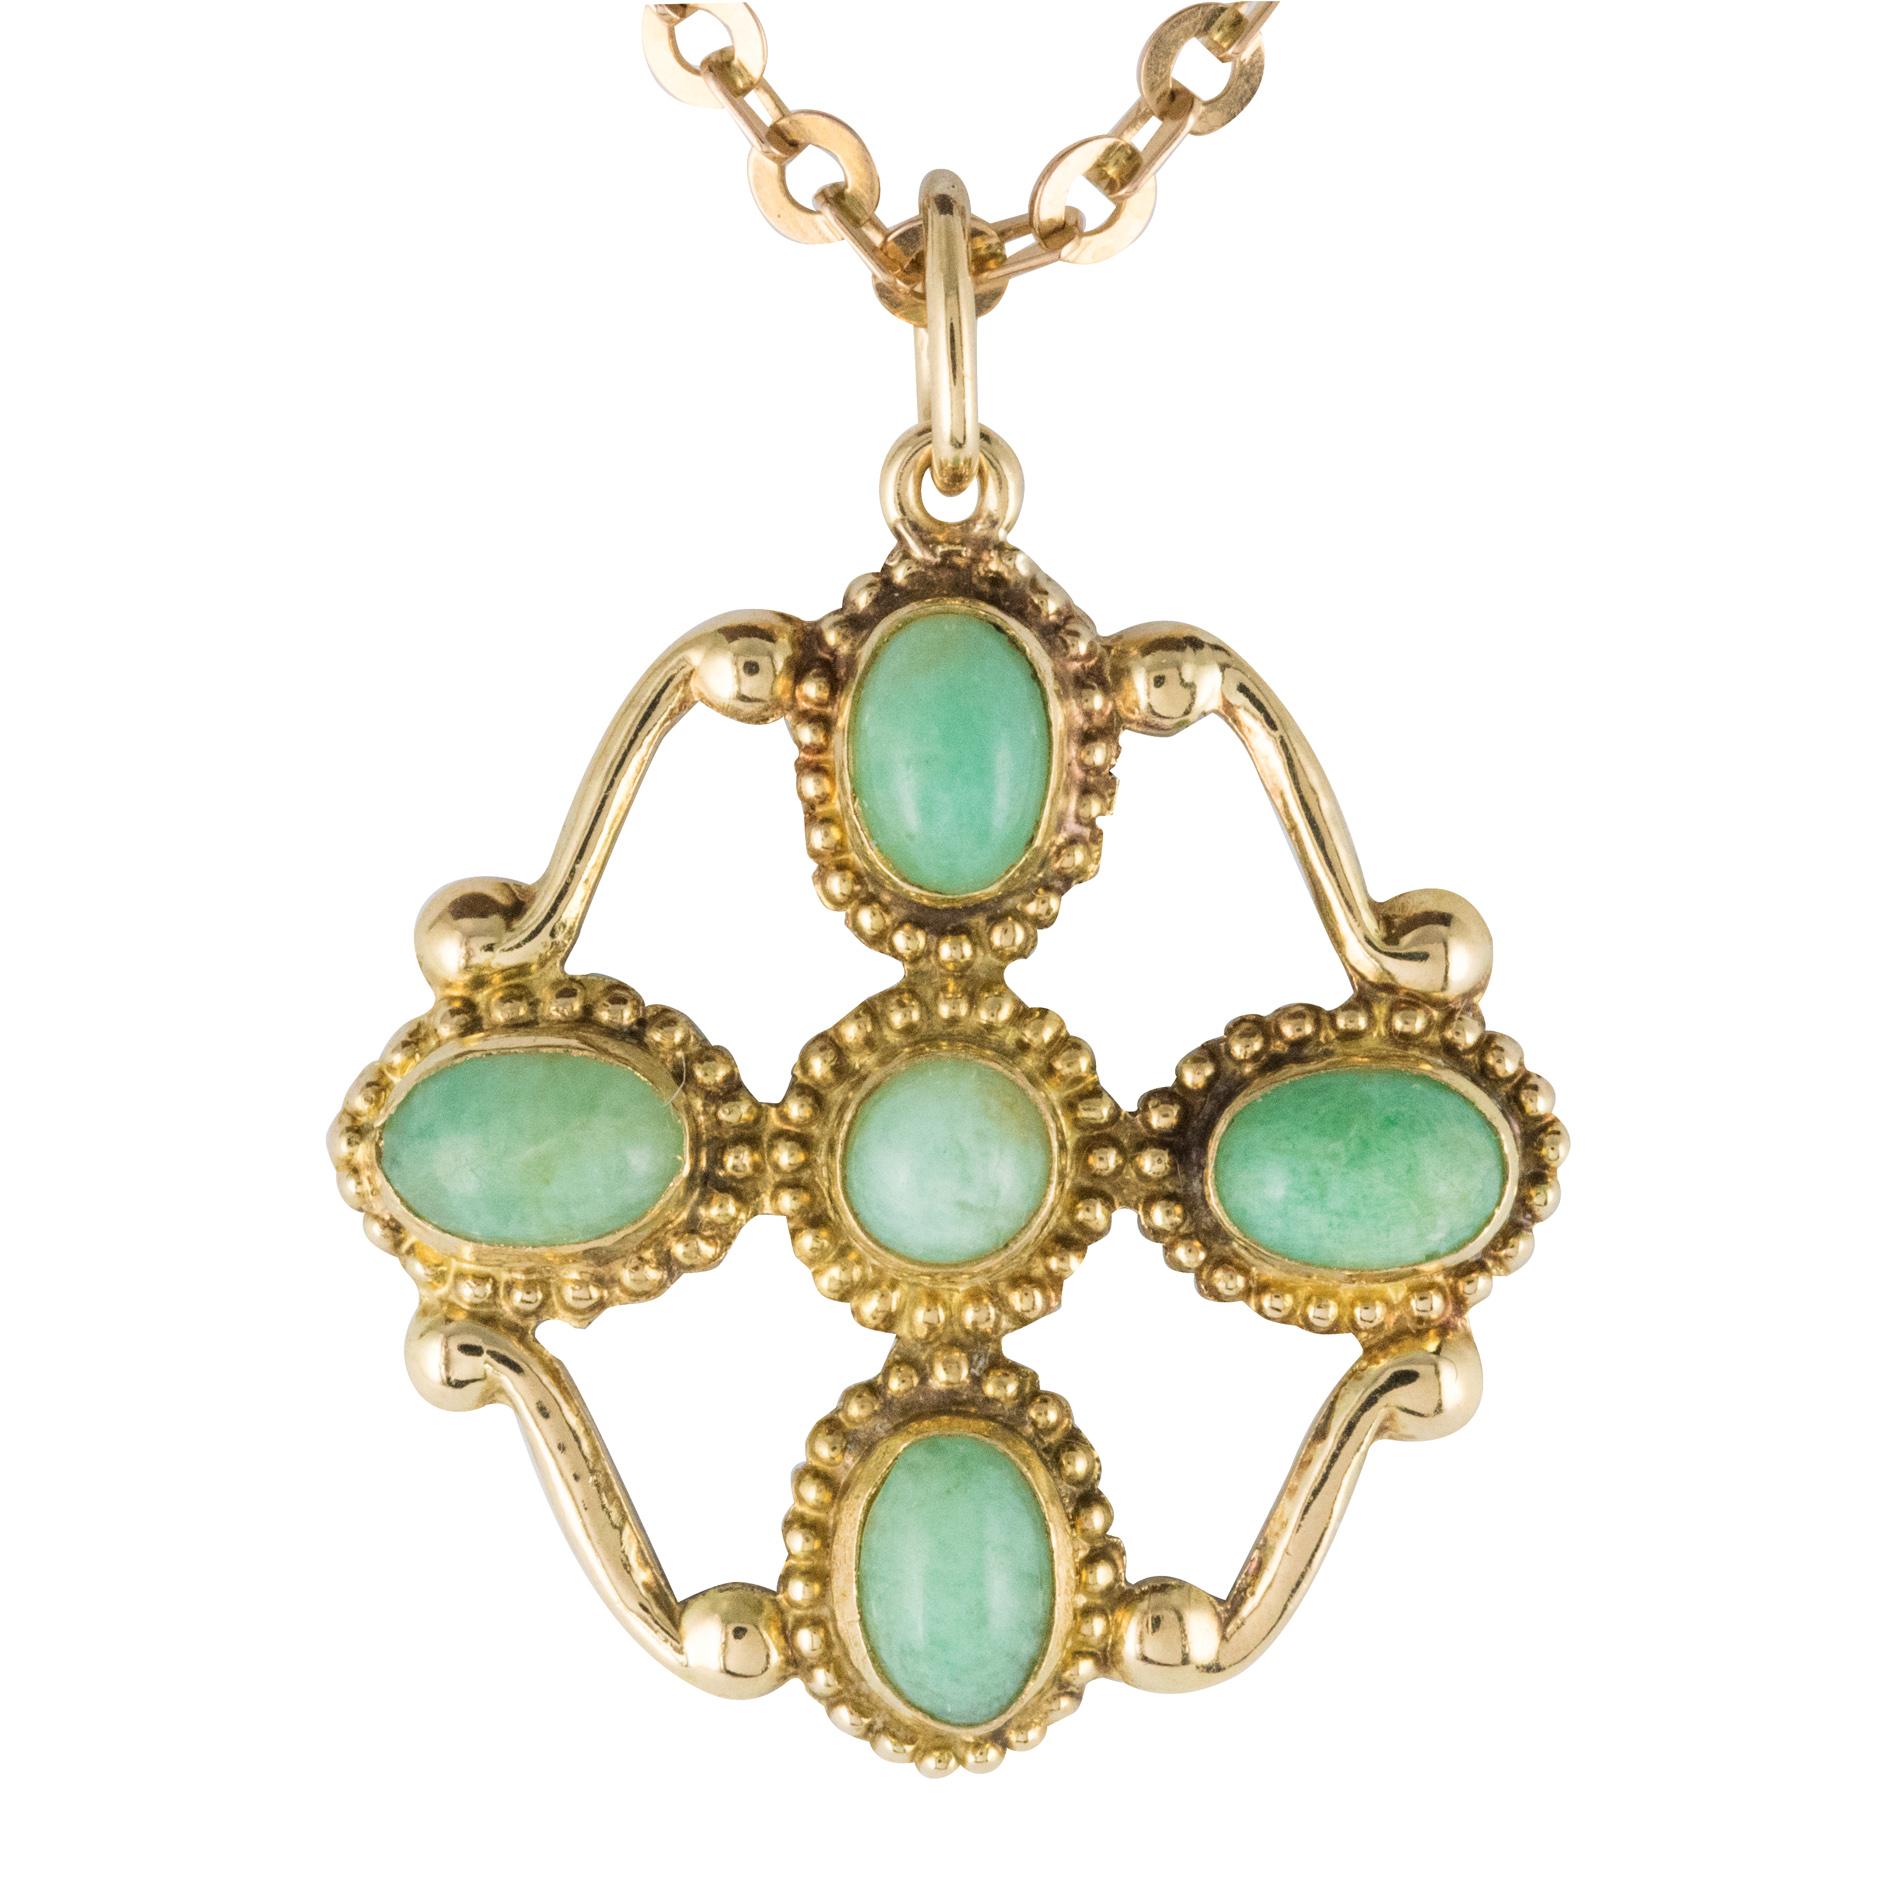 1960s Vintage 18 Karat Yellow Gold Amazonite Pendant Necklace and Chain